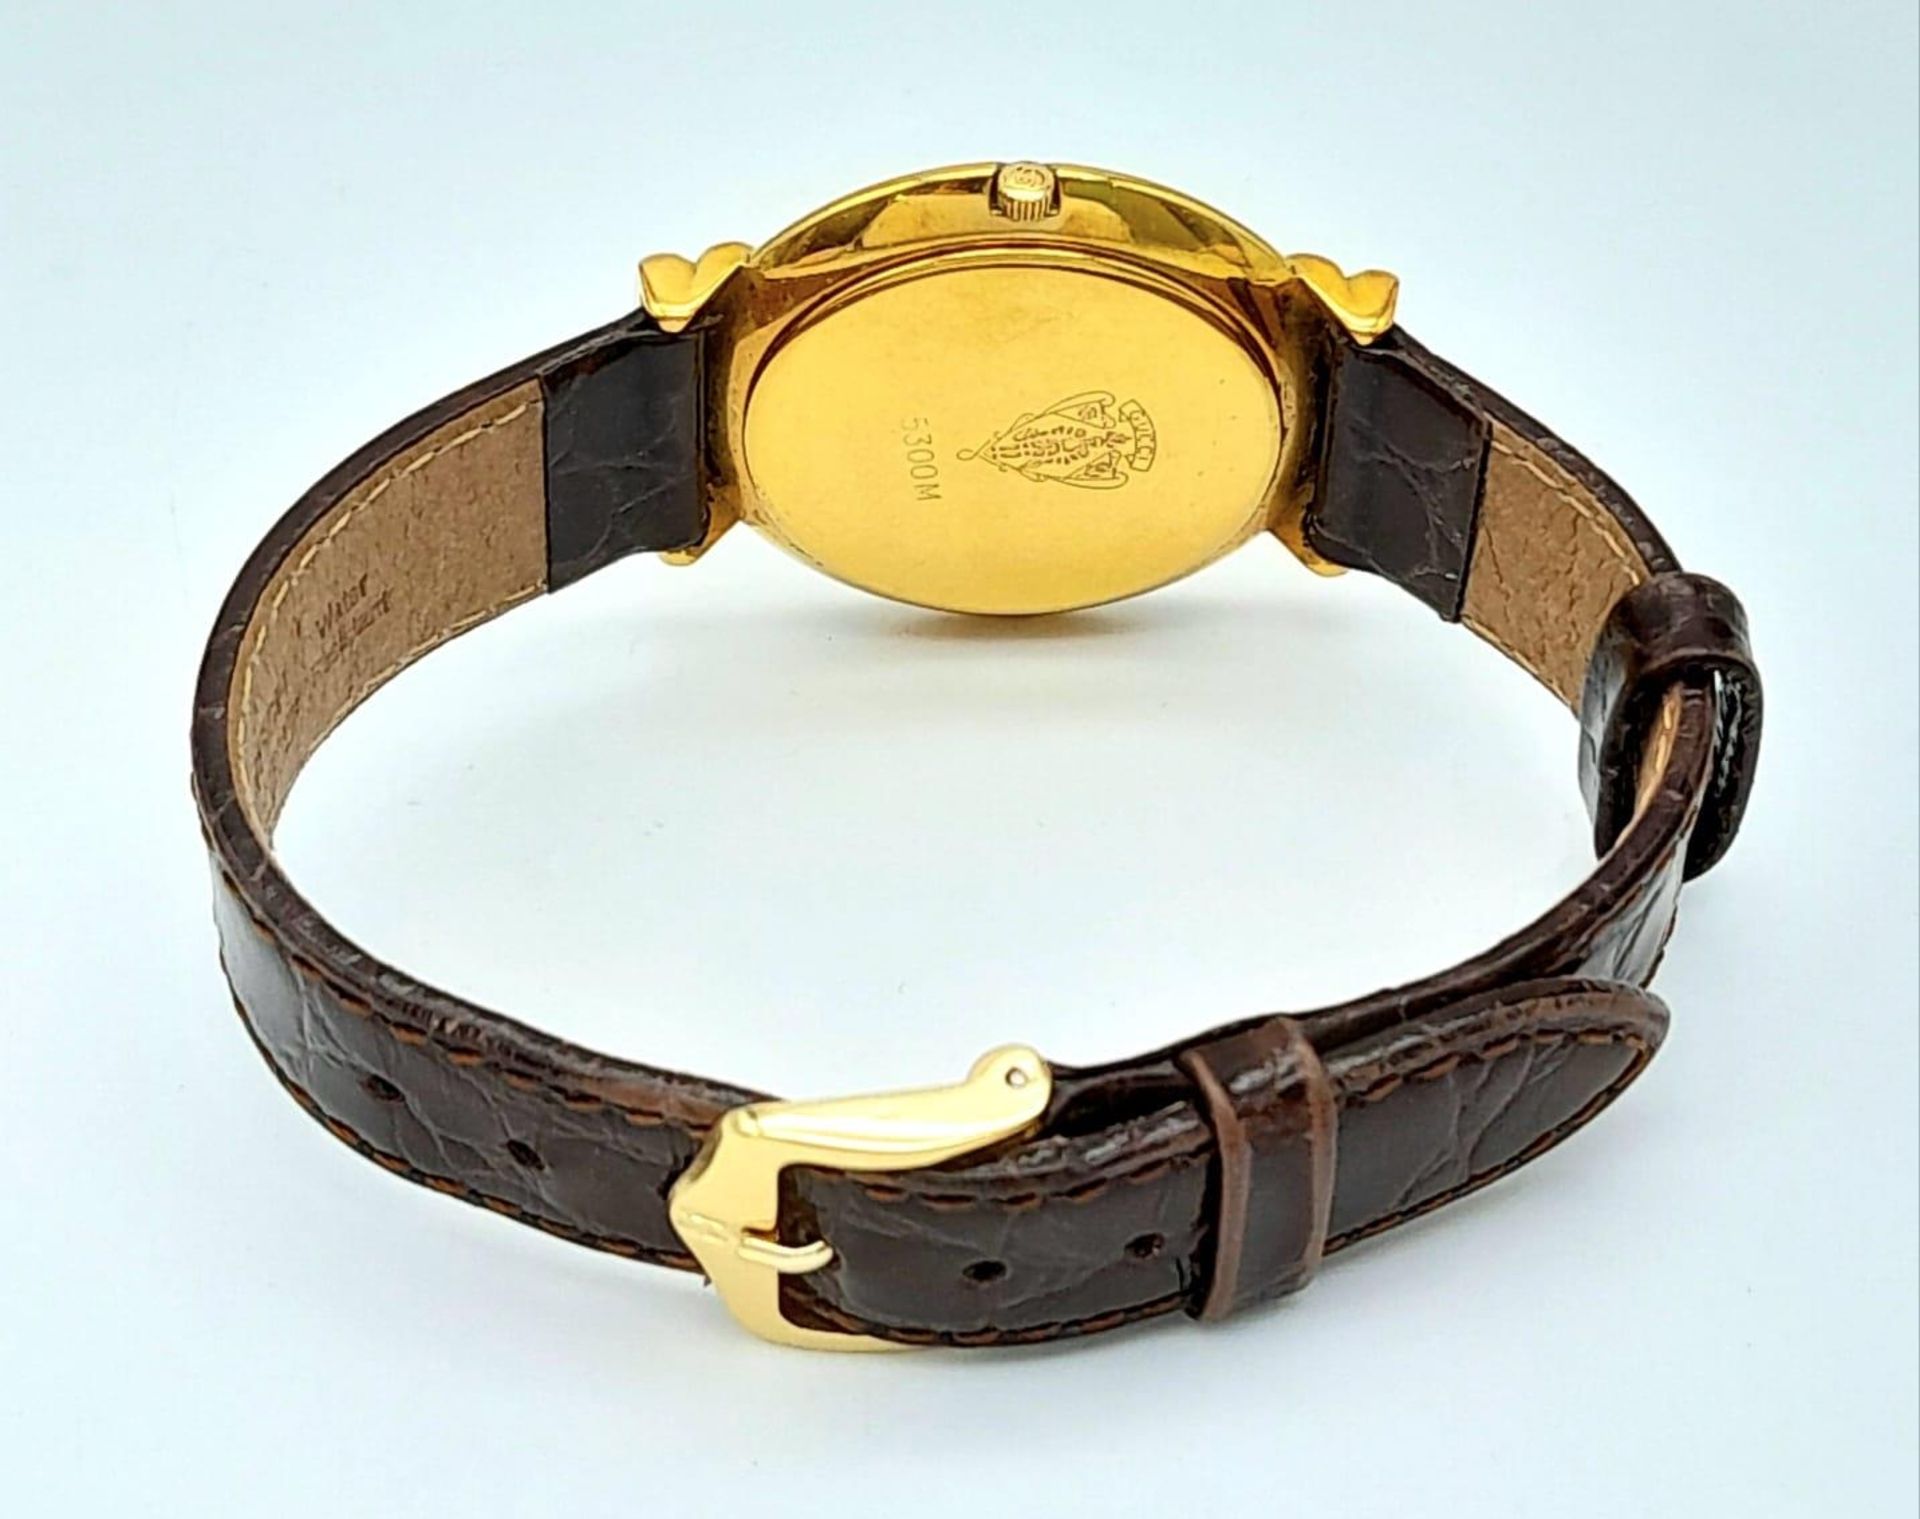 A gold plated GUCCI with crocodile skin strap, case: 33 mm, gold coloured dial and hands, Swiss made - Image 5 of 7